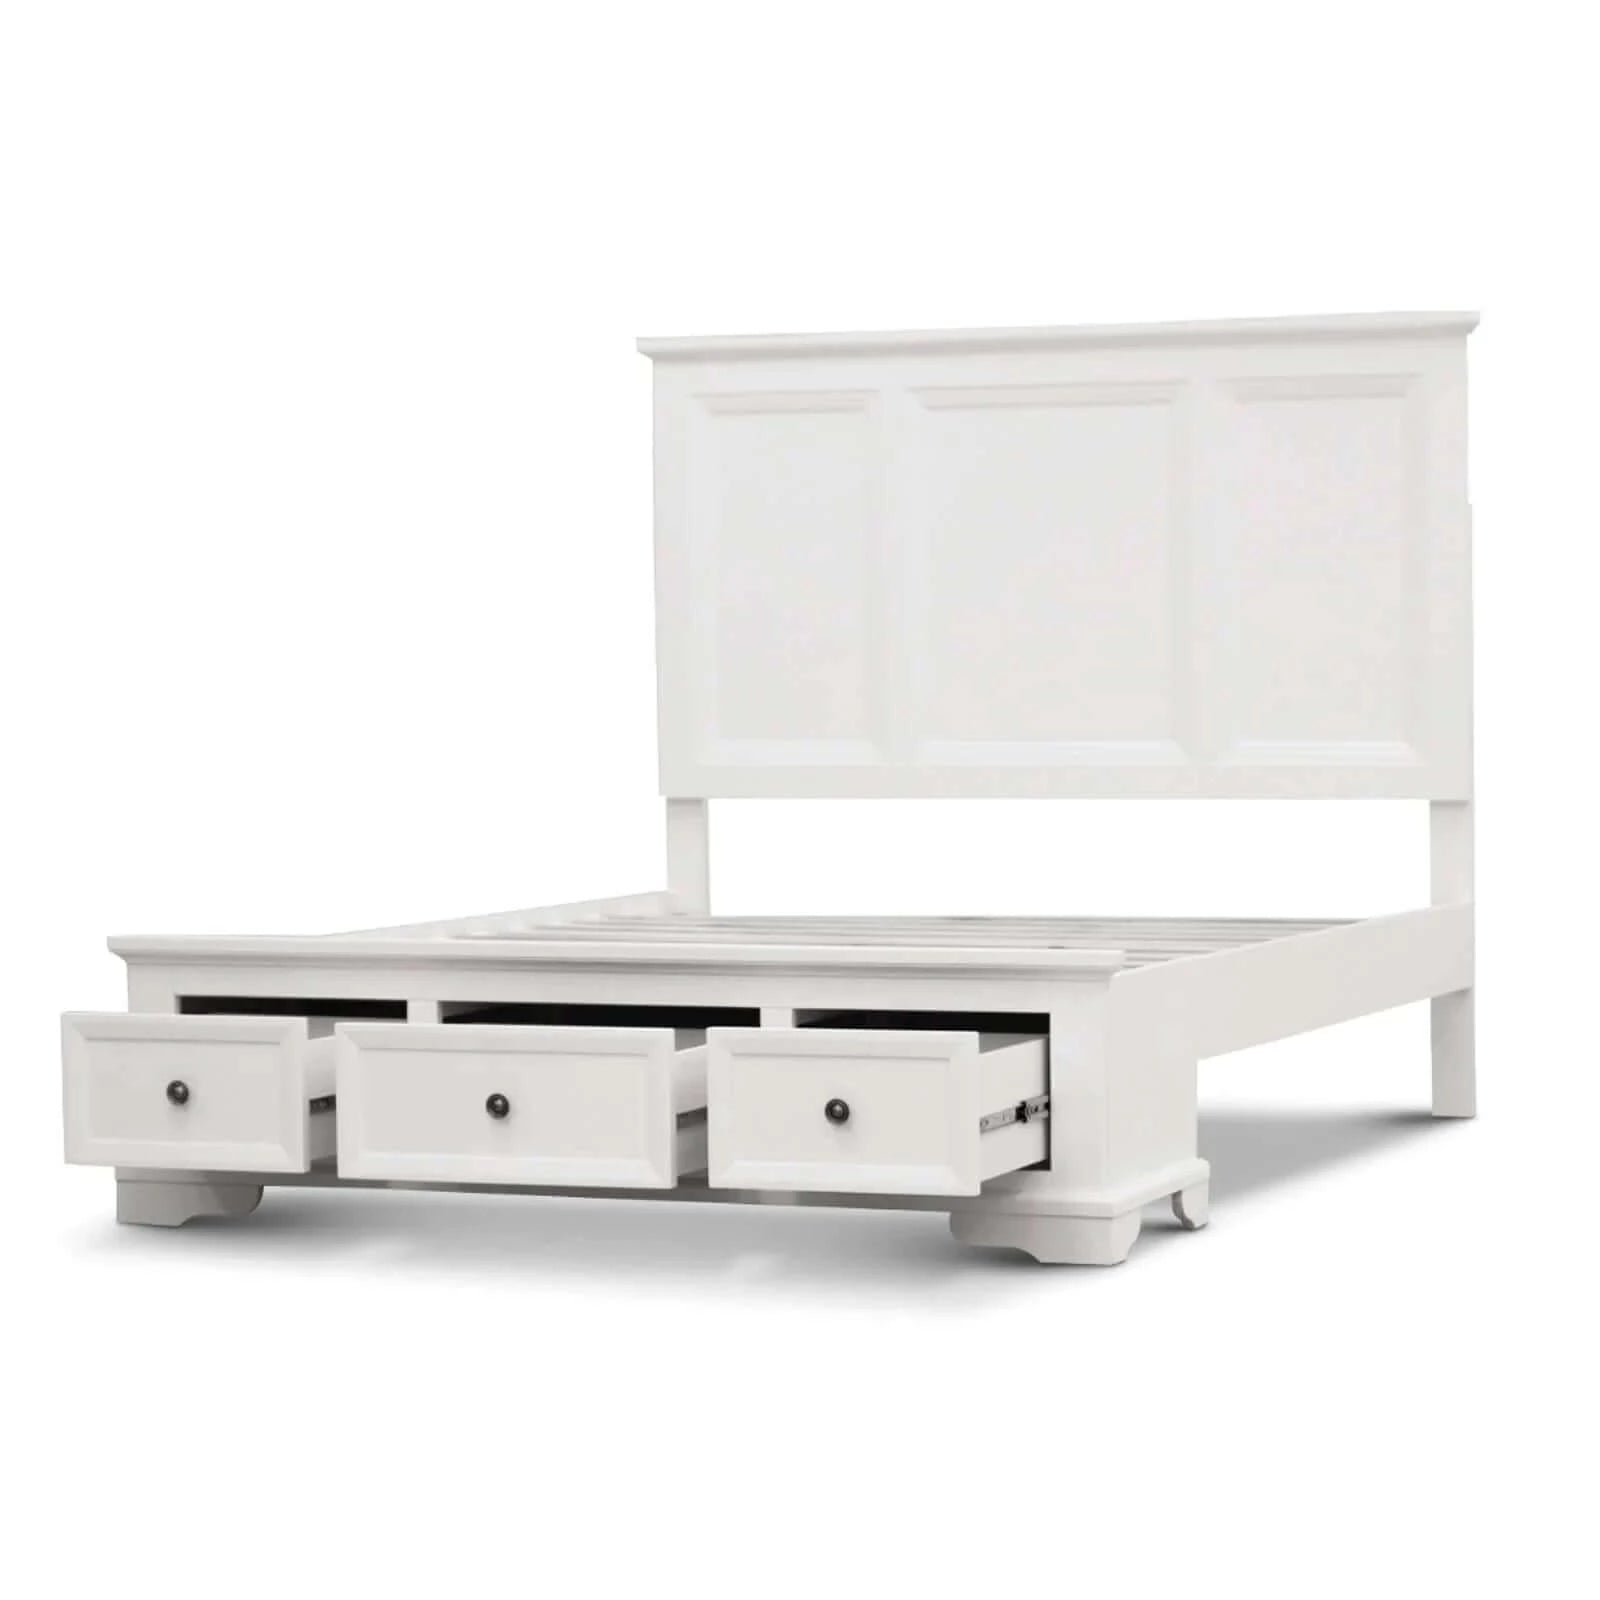 Buy celosia queen size bed frame timber mattress base with storage drawers - white - upinteriors-Upinteriors